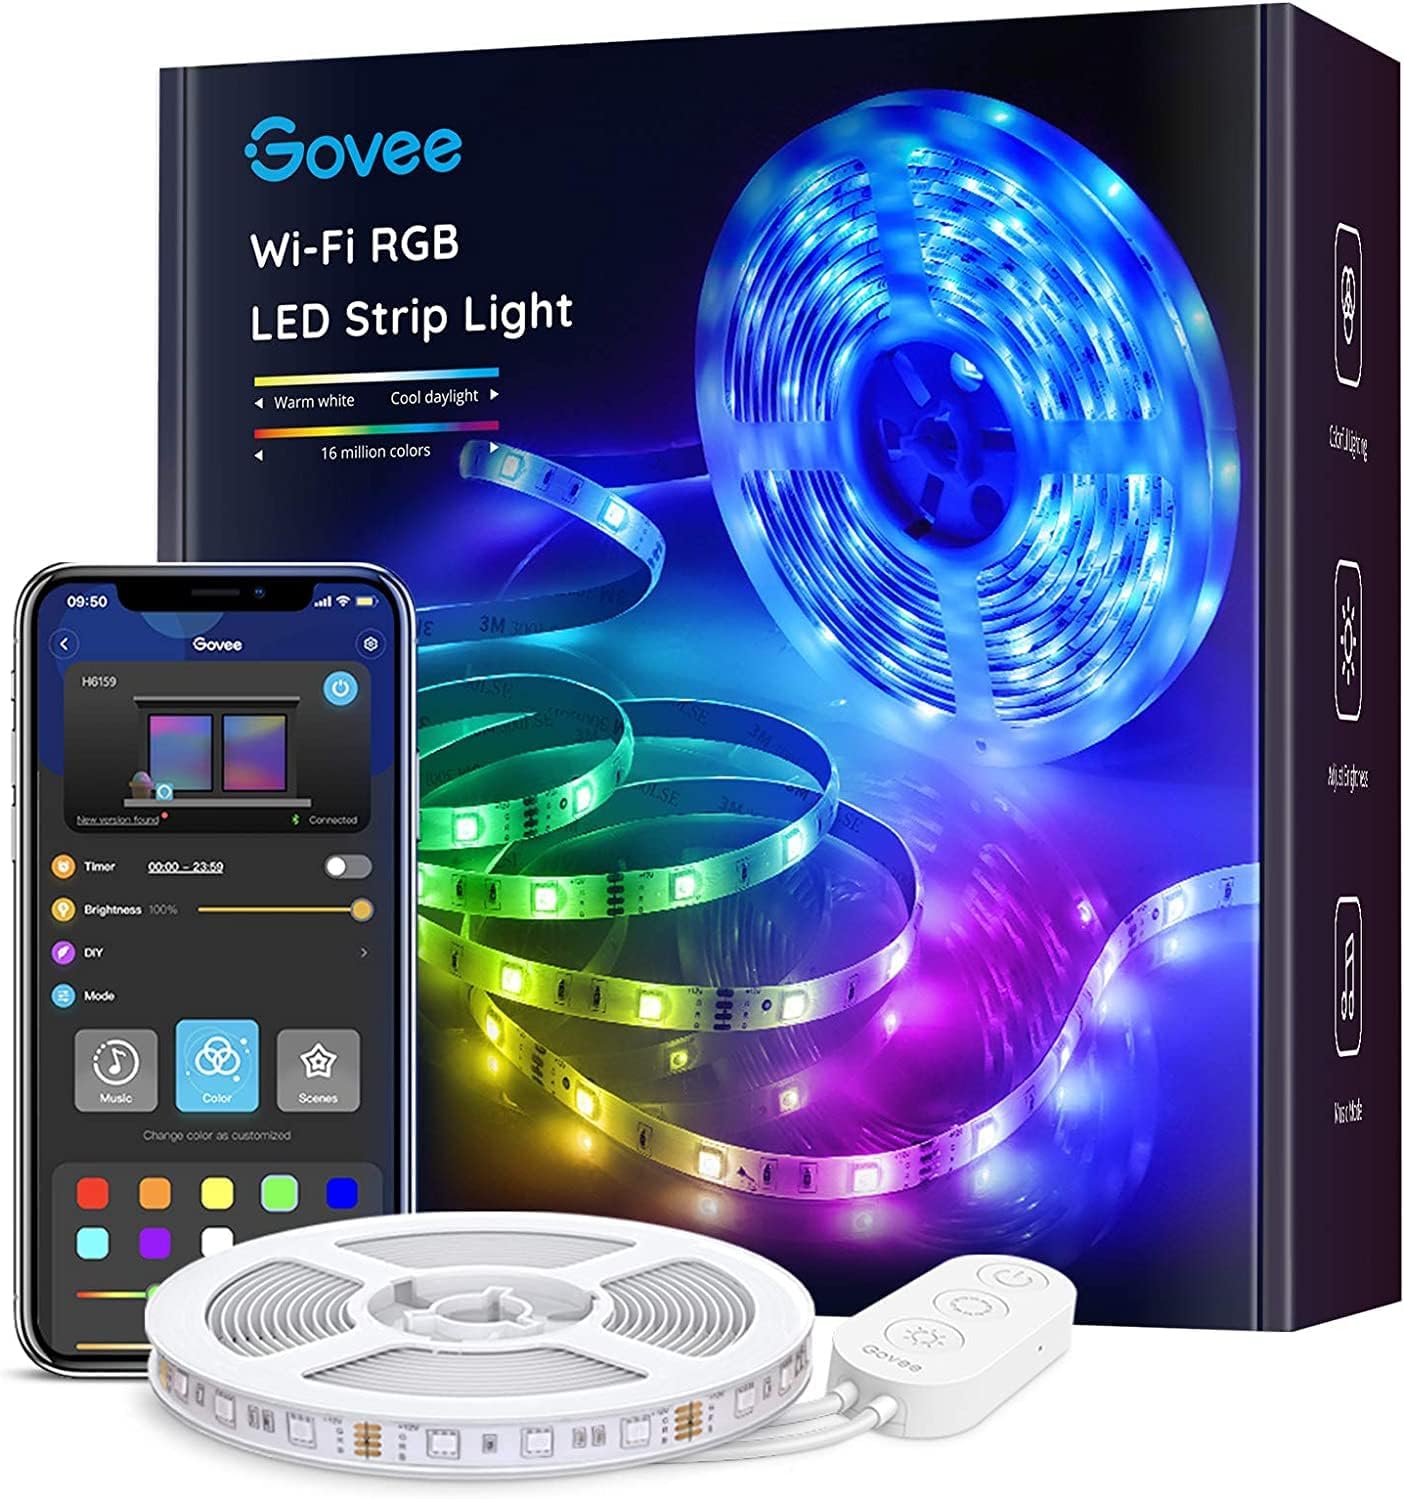 A Govee smart strip box that lights up photos next to a phone with controls